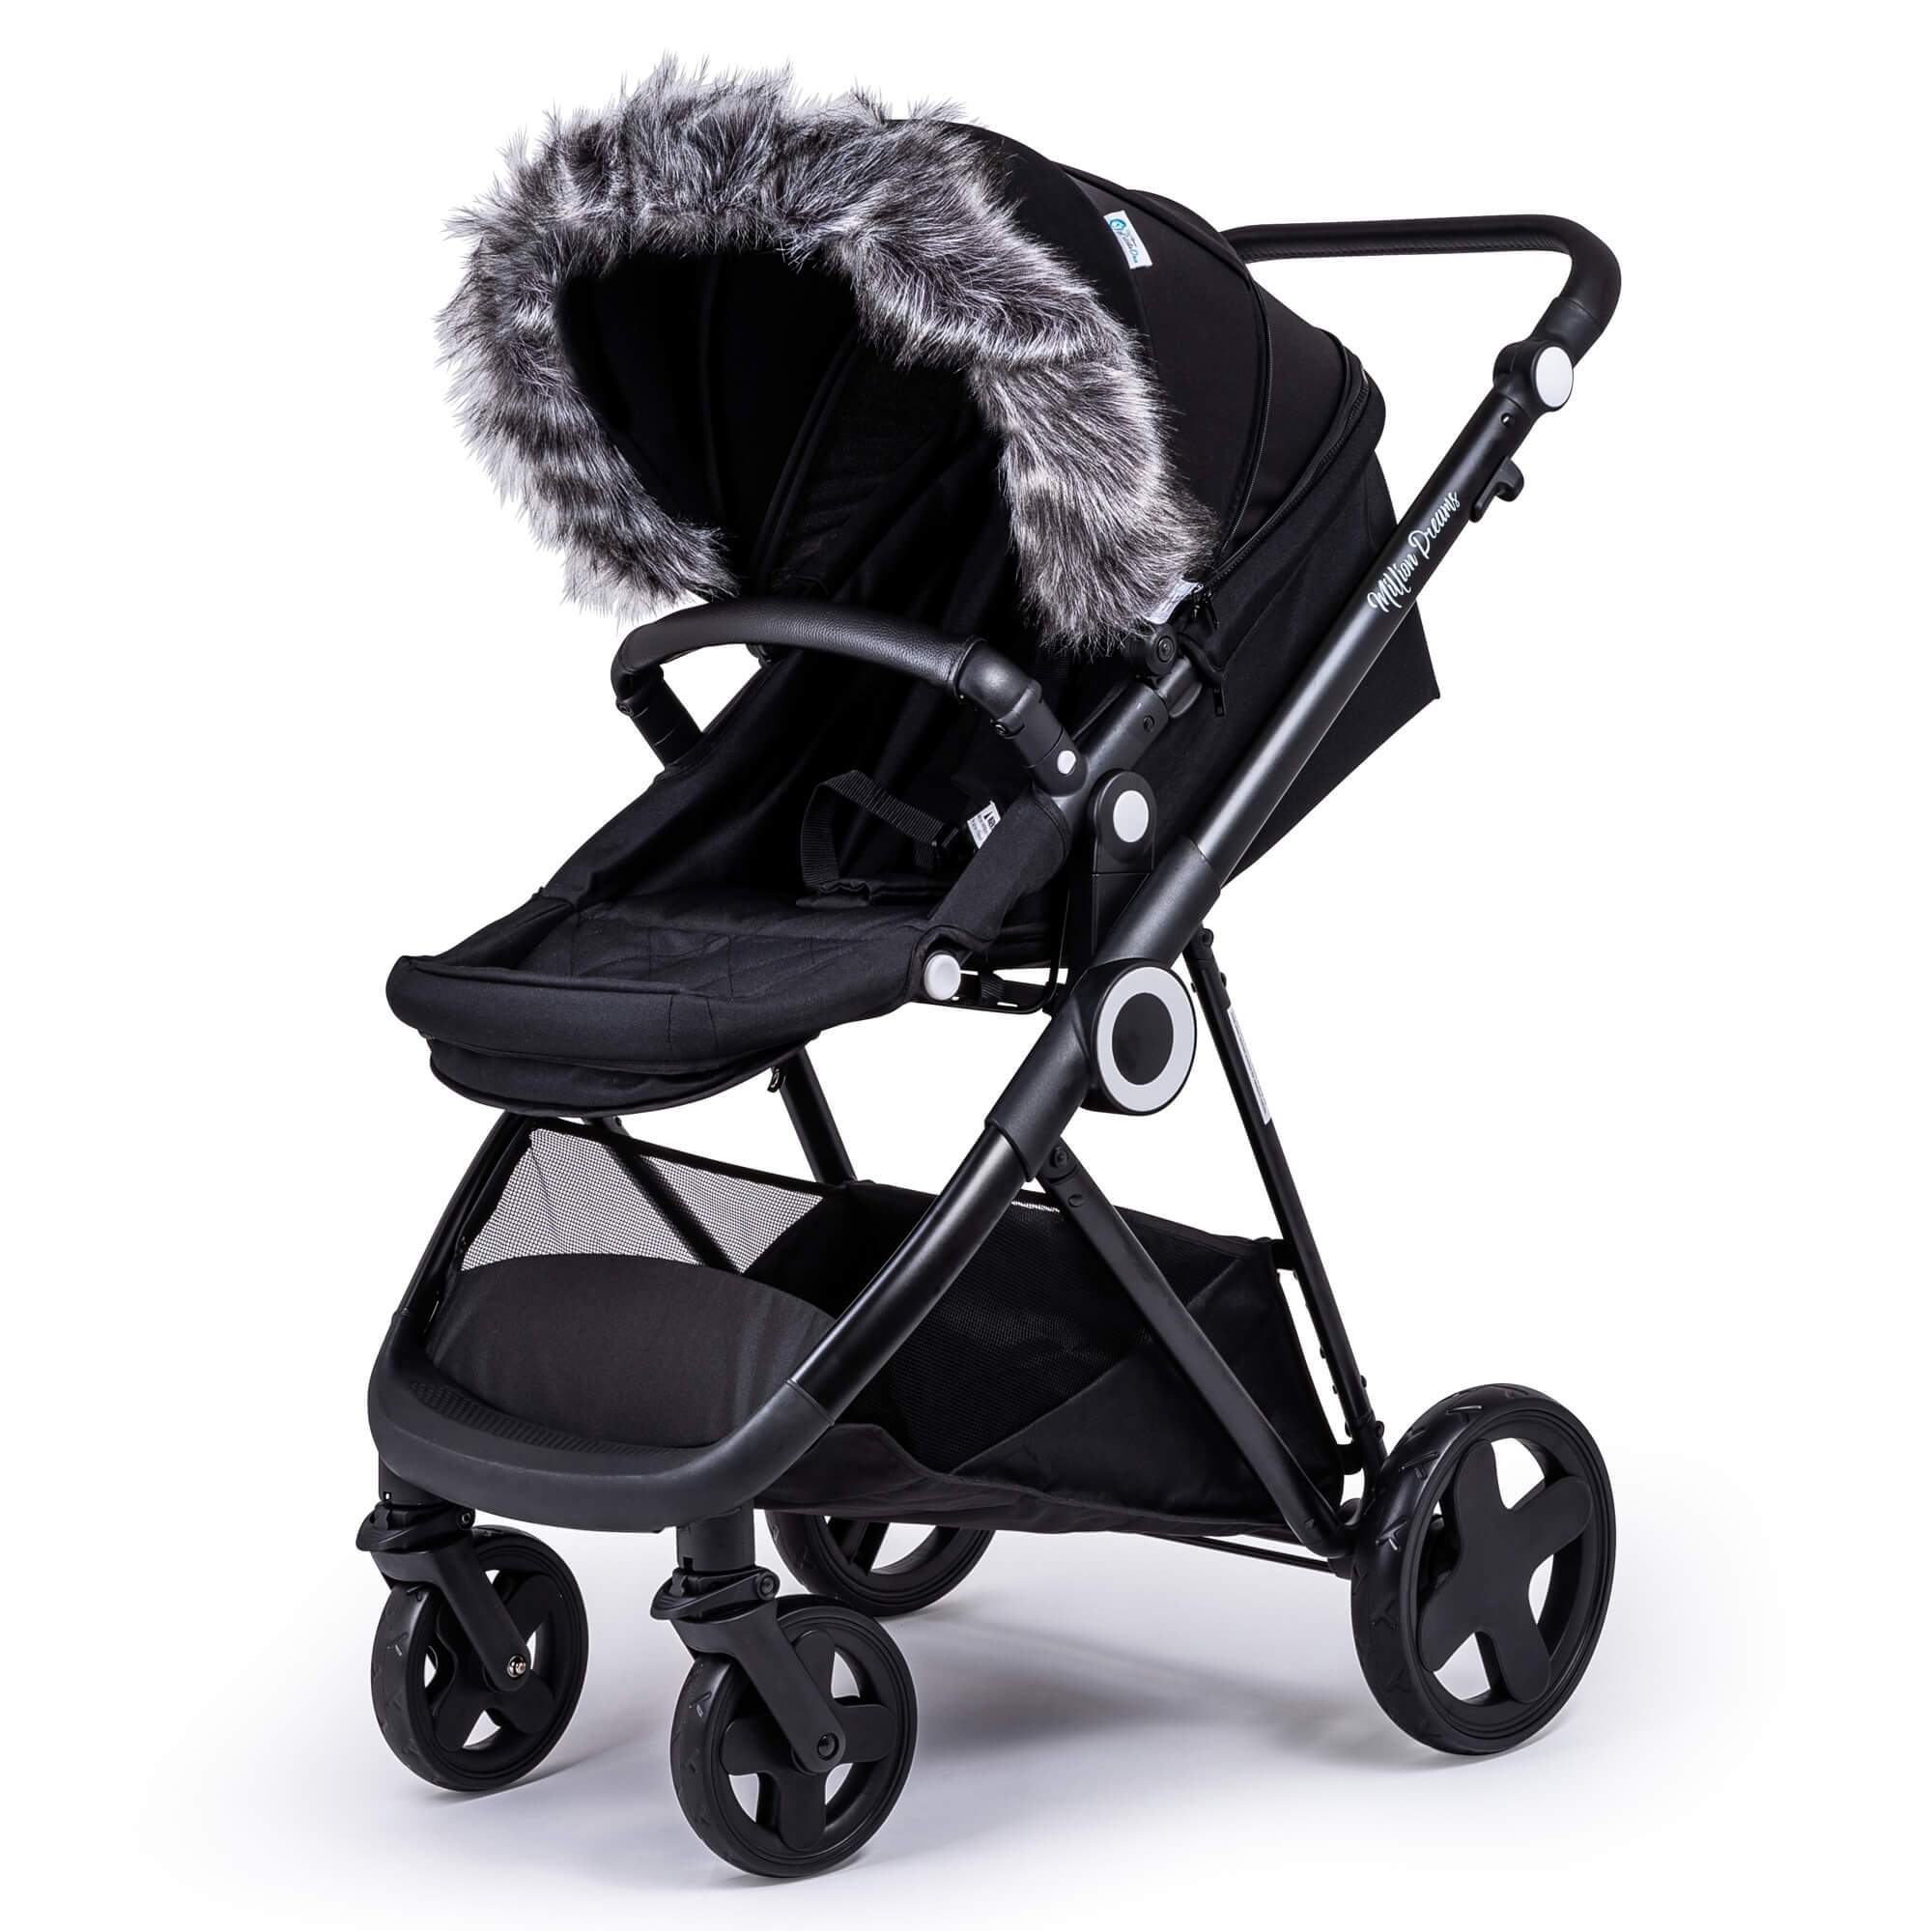 Pram Fur Hood Trim Attachment for Pushchair Compatible with NeoNato - Dark Grey / Fits All Models | For Your Little One